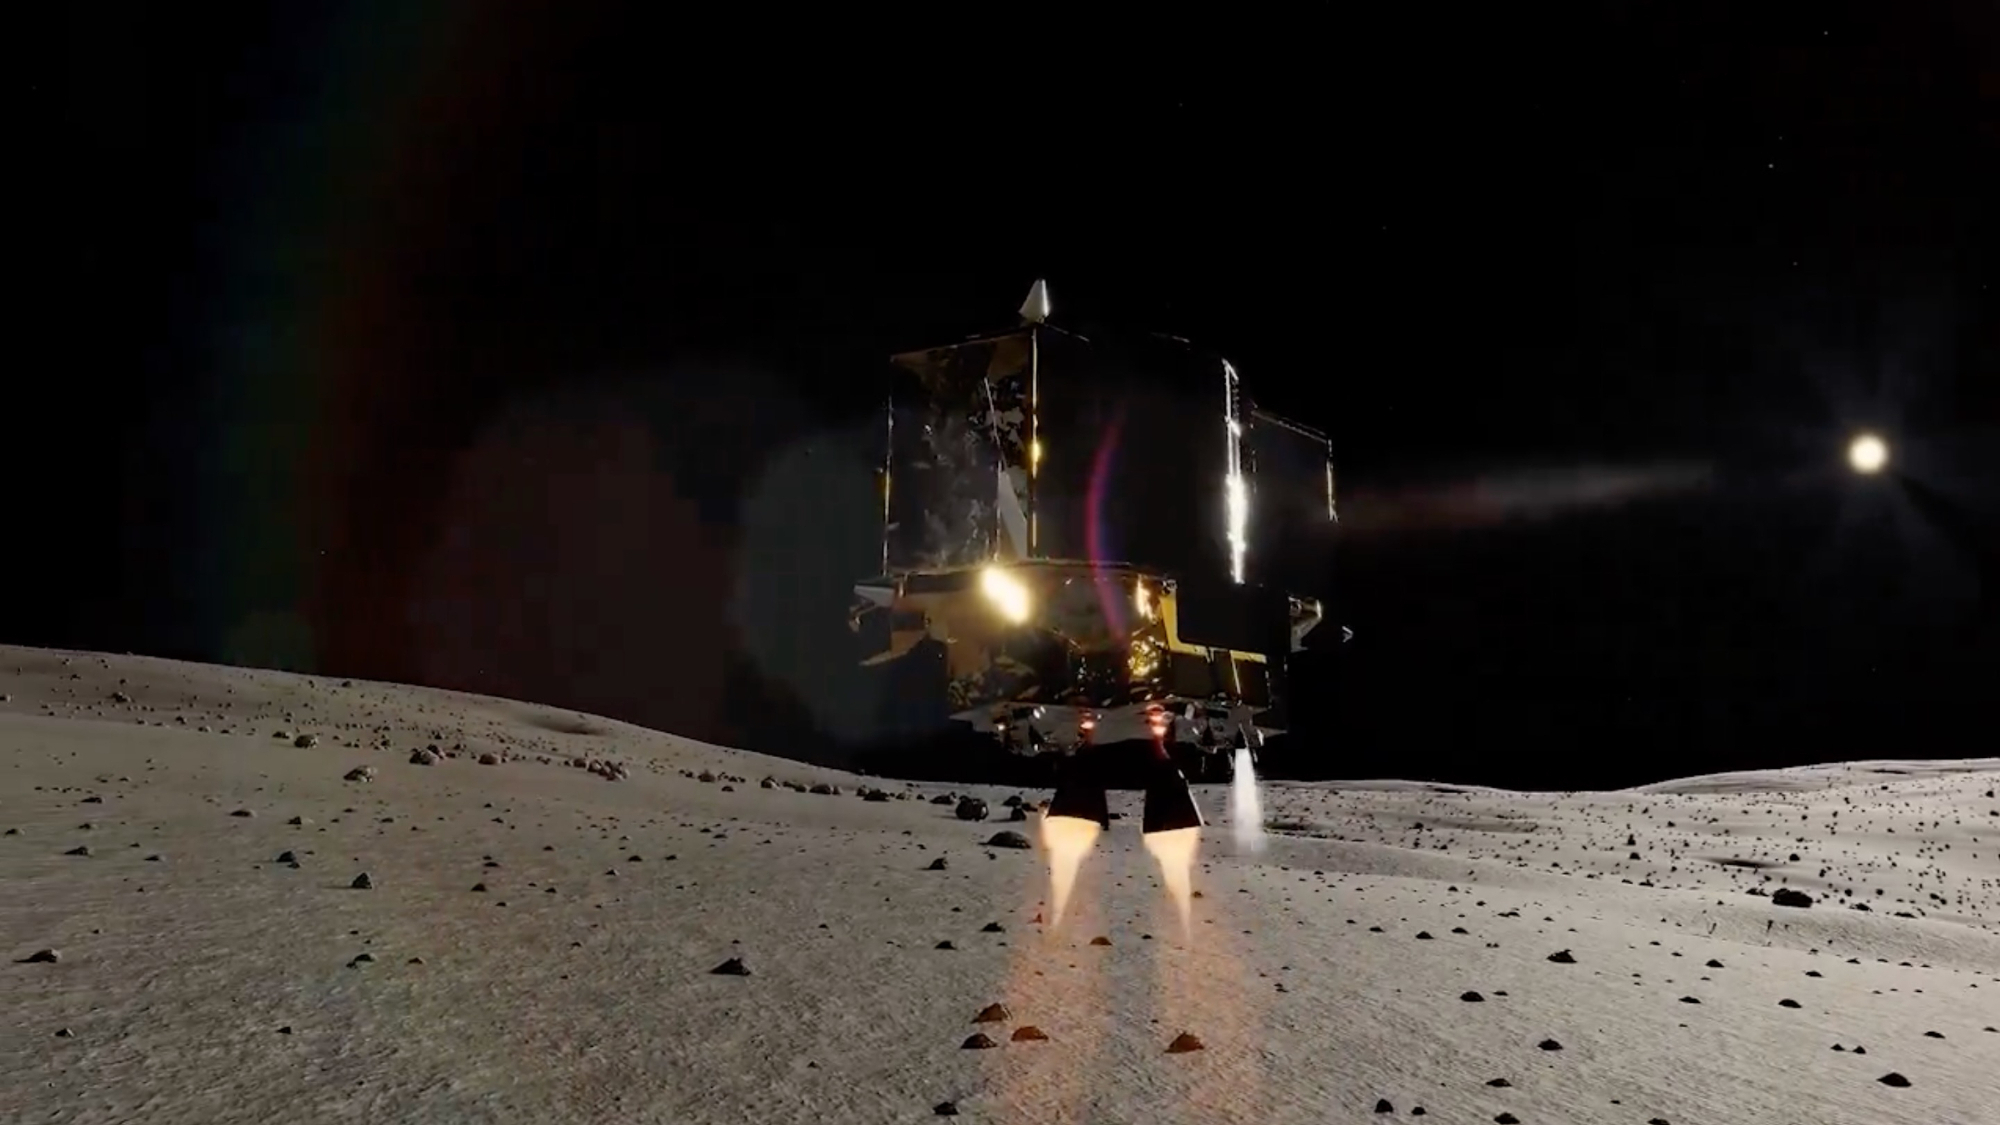 Japan’s ‘Moon Sniper’ probe attempts historic soft-landing on lunar surface. But did it make it?